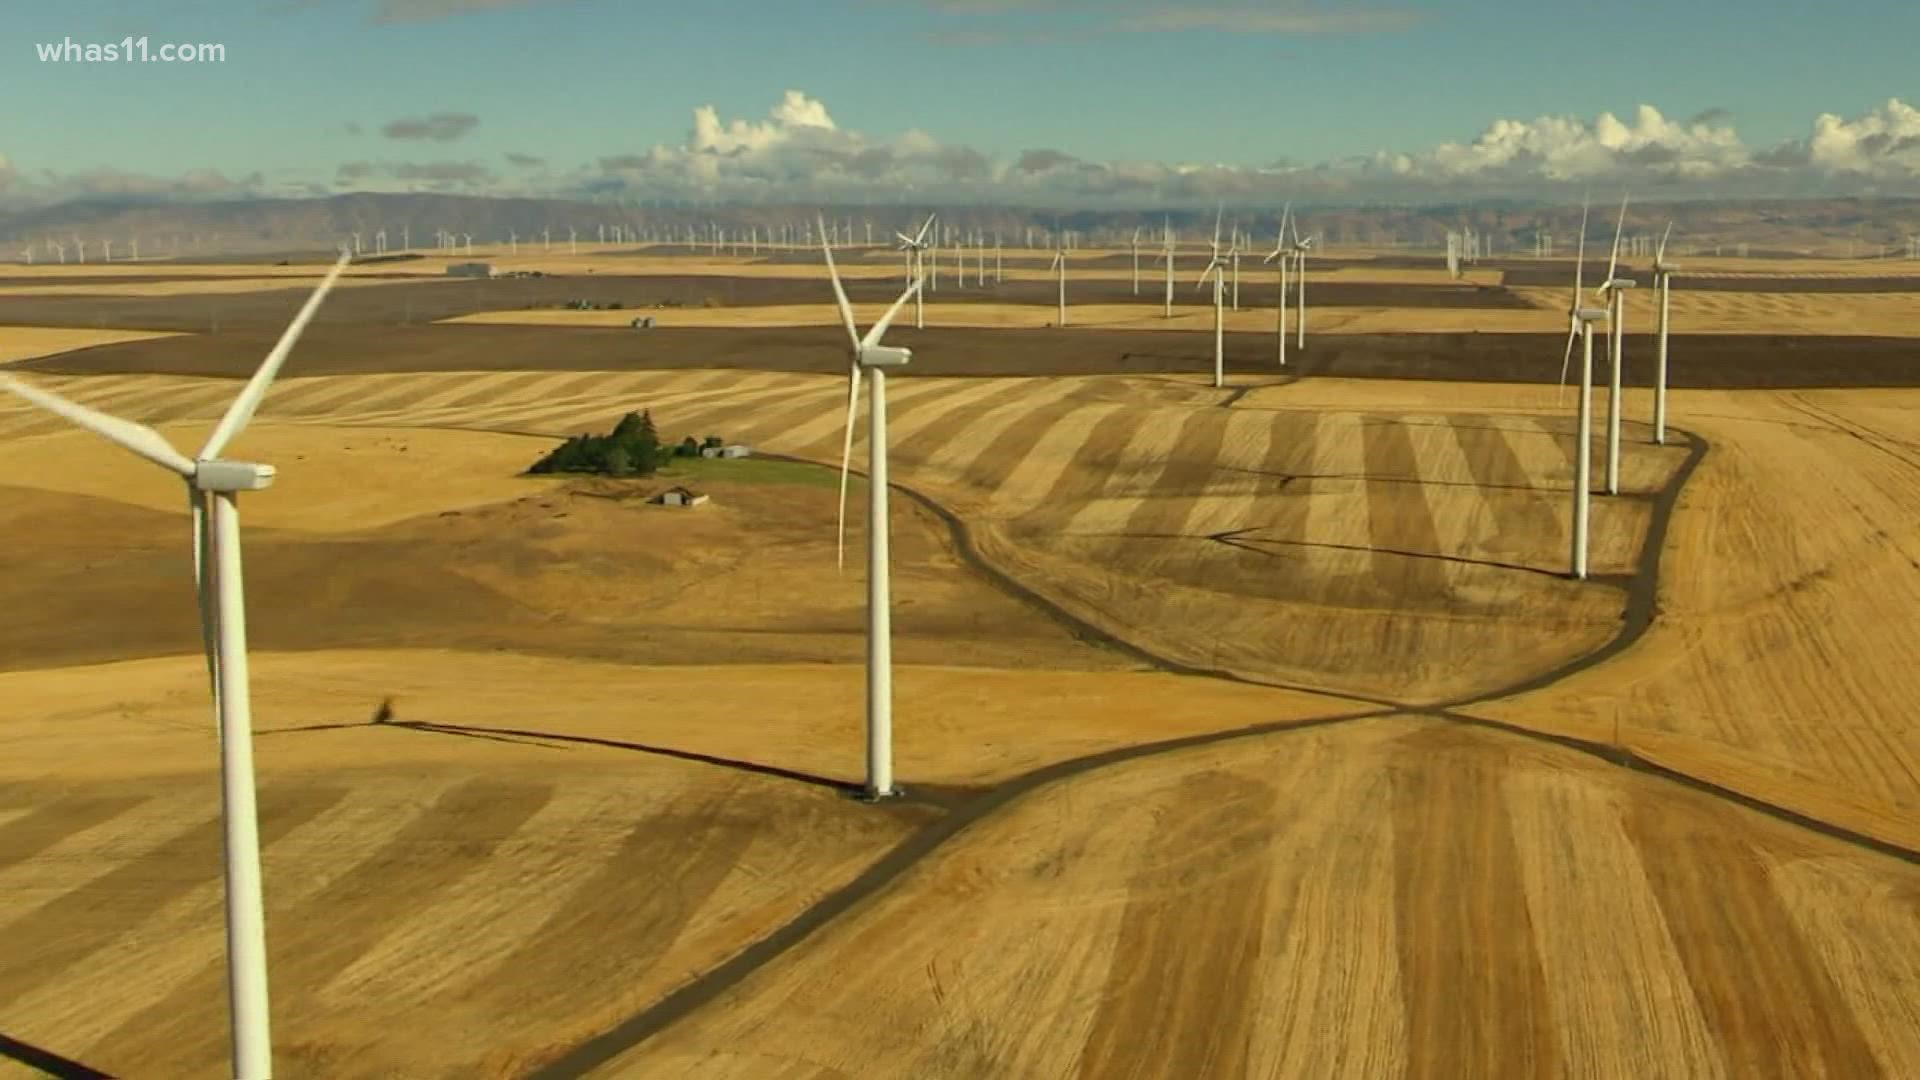 'Good Morning America' takes a deeper look into what wind turbines could mean for the U.S. economy and future careers.